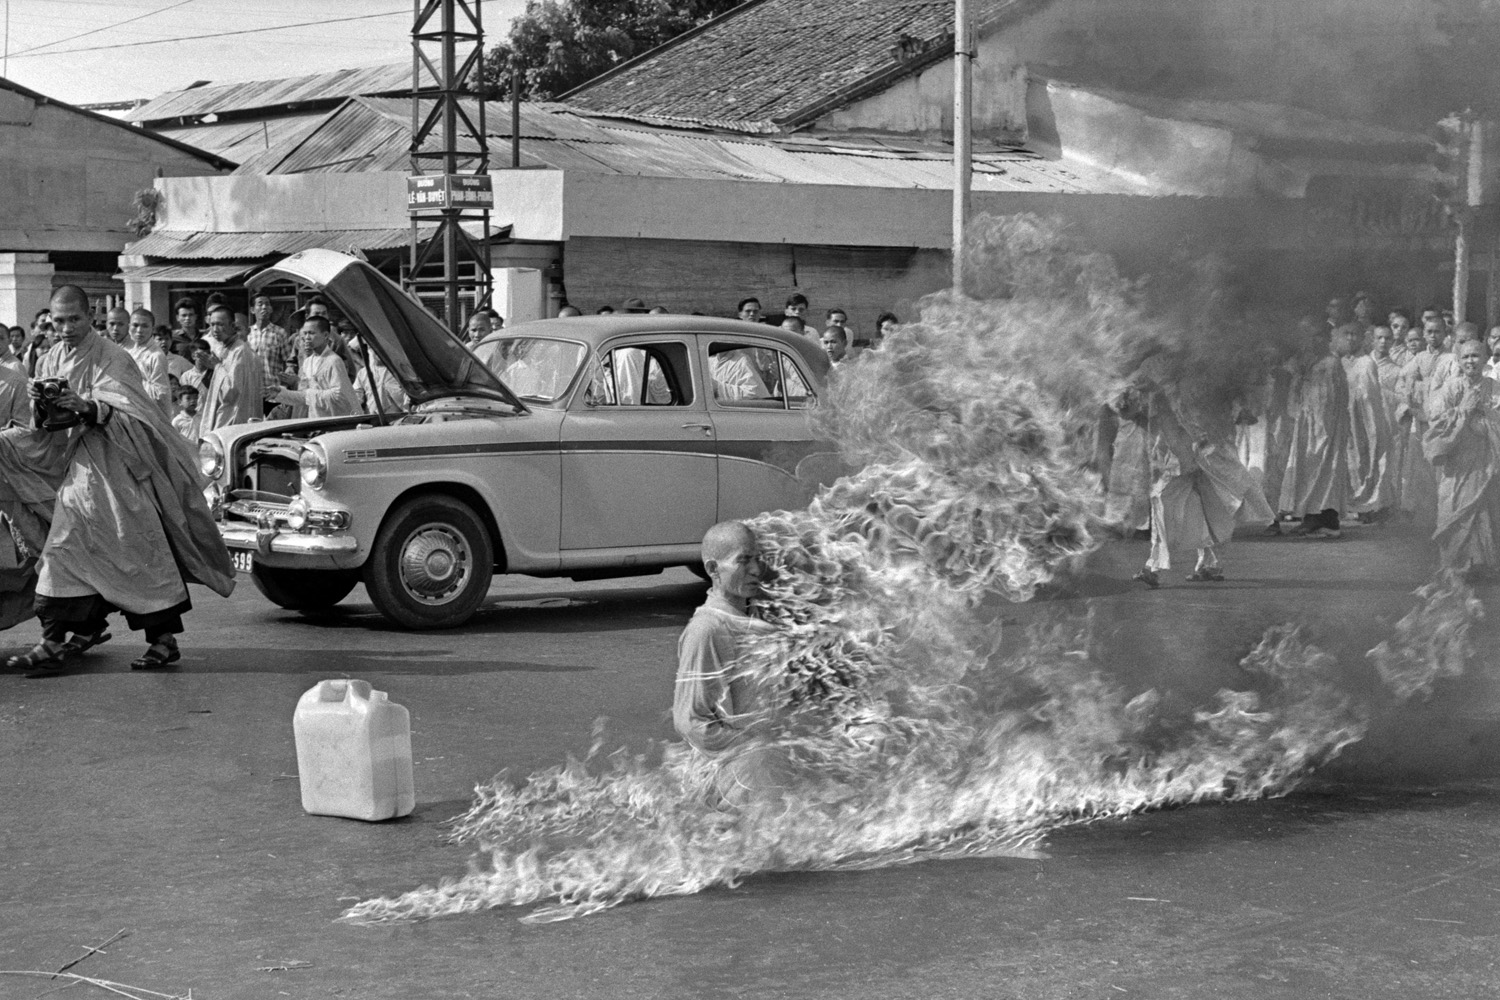 Quang Duc sat still as he was engulfed in flame.